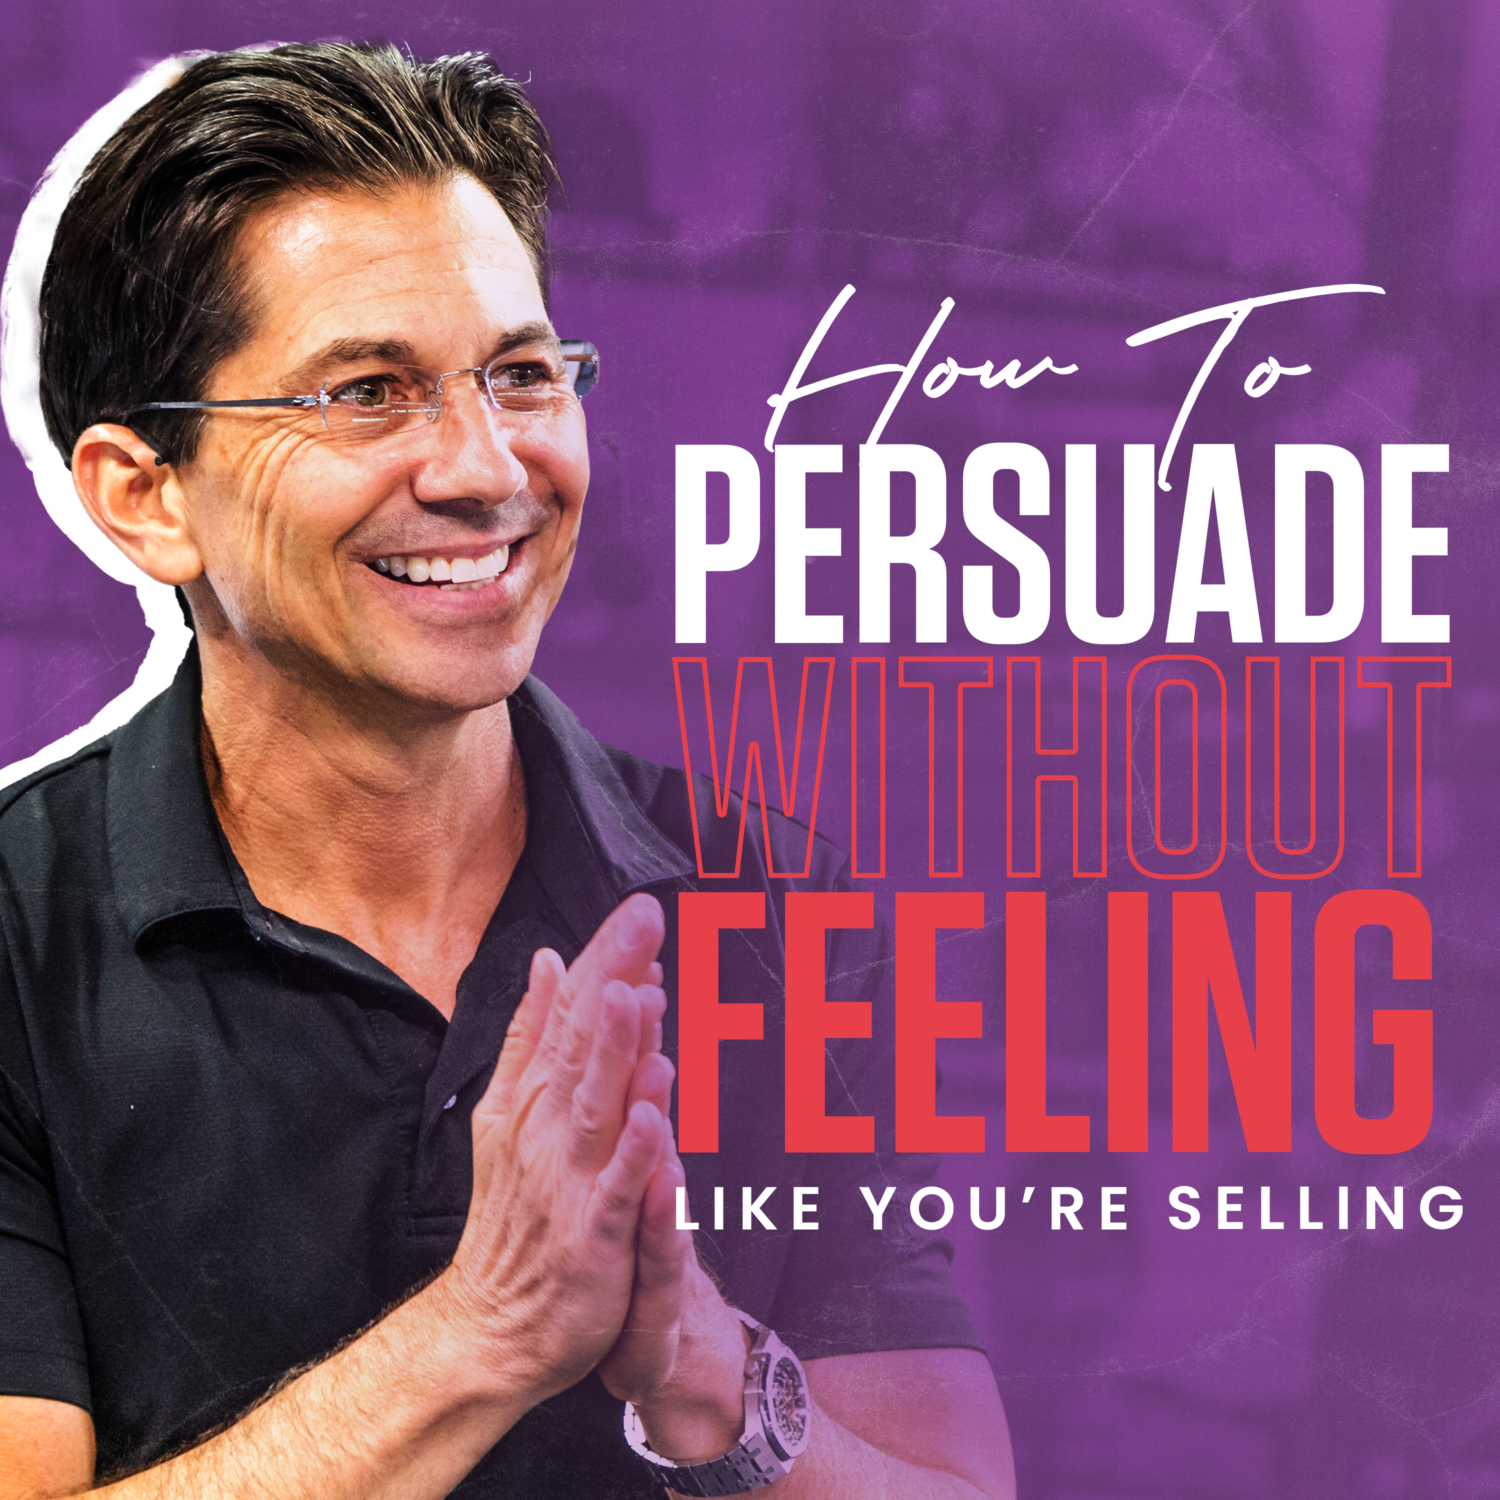 How to Persuade Without Feeling Like You're Selling